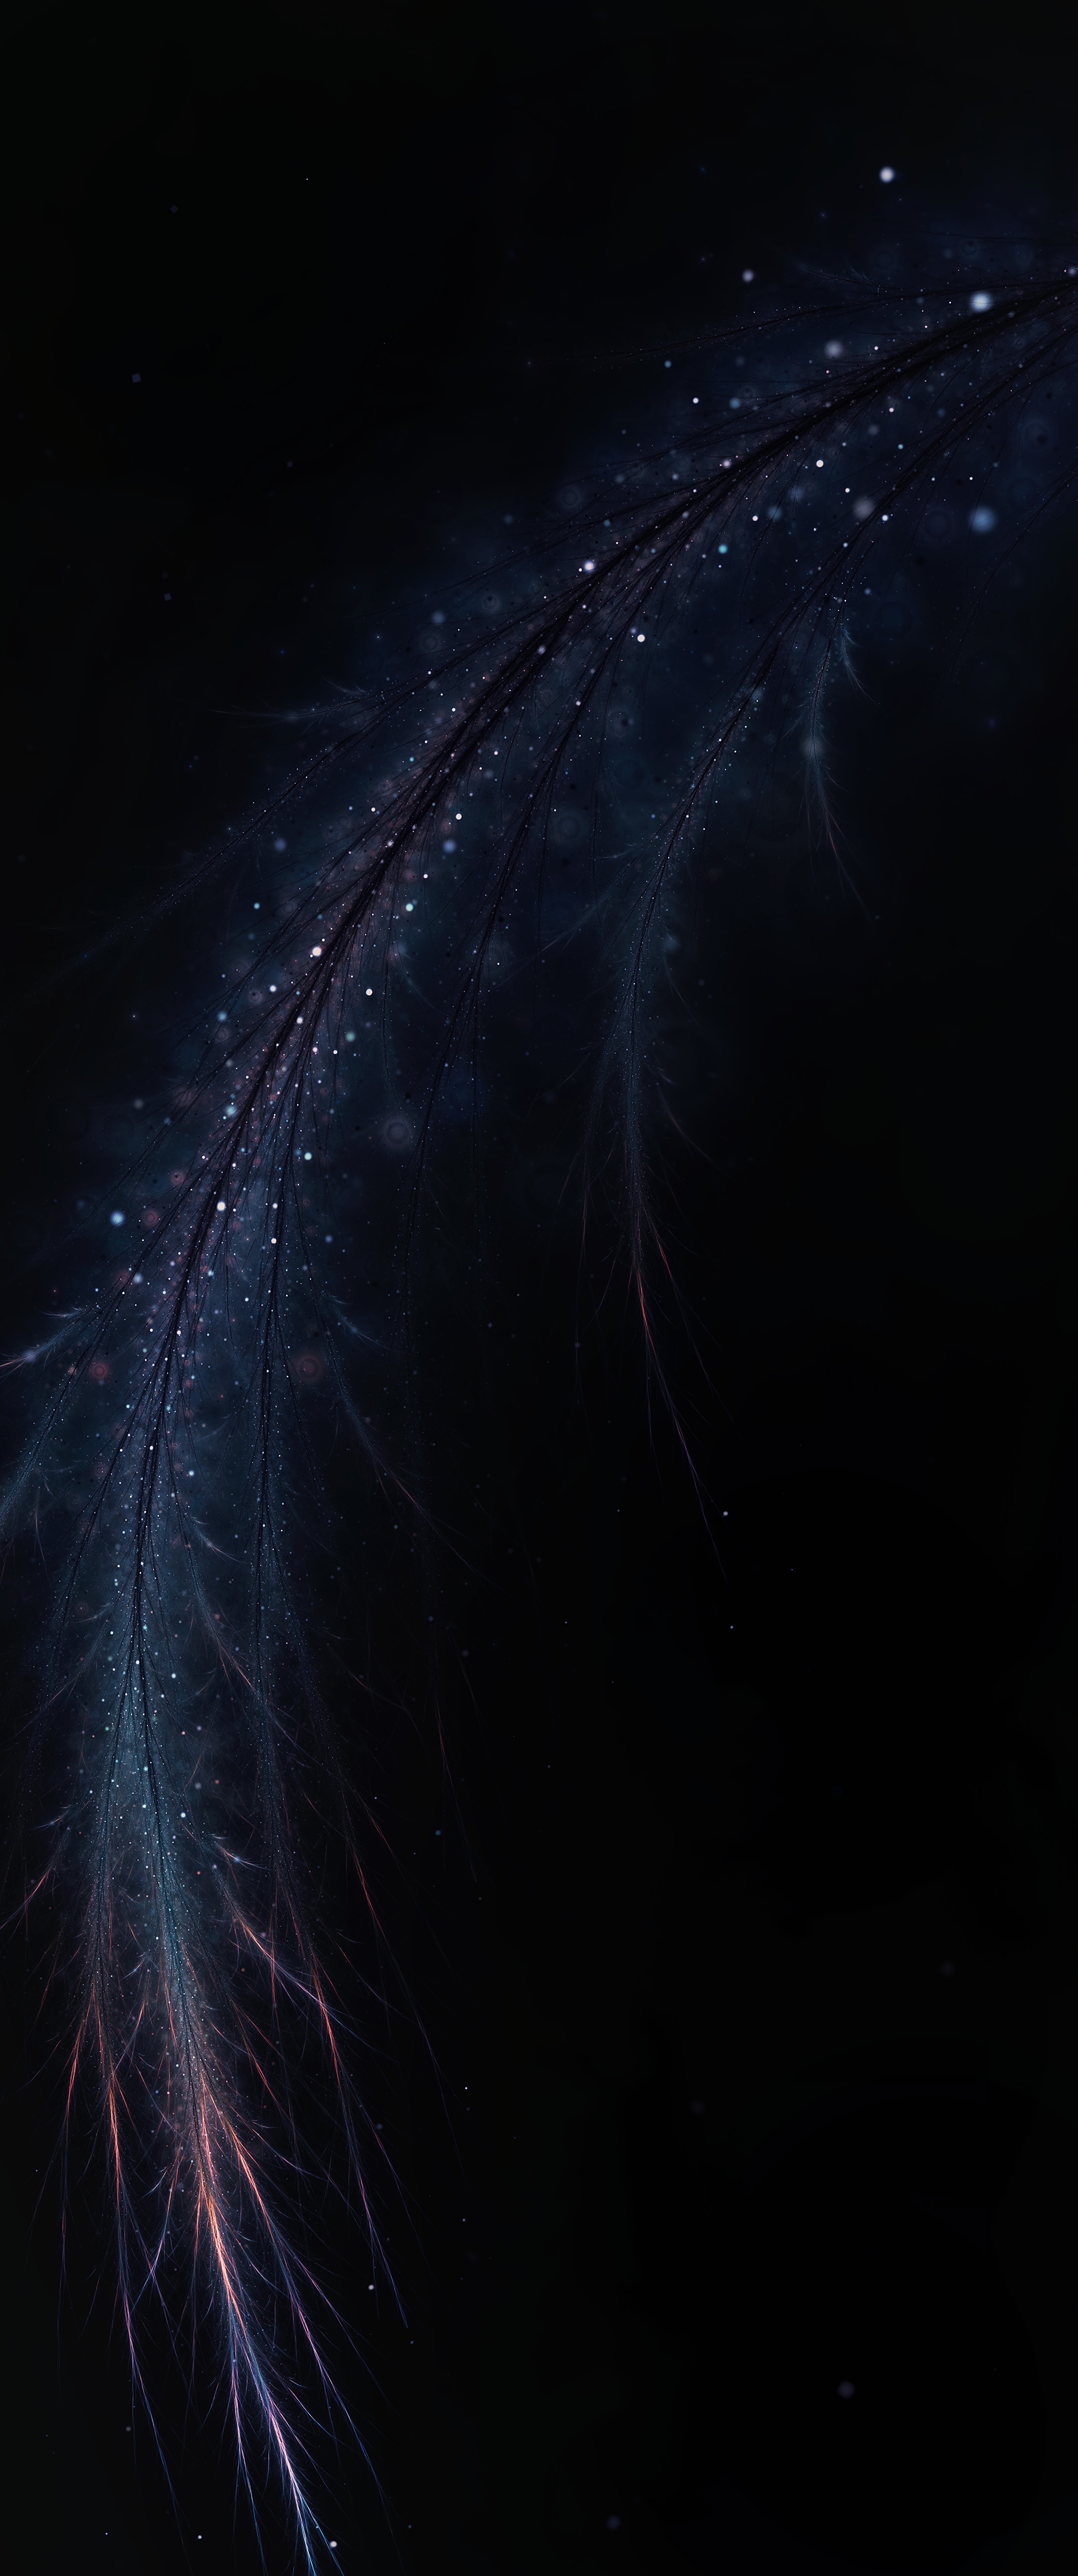 Free HD brilliance, pen, feather, dark, abstract, branch, fractal, shine